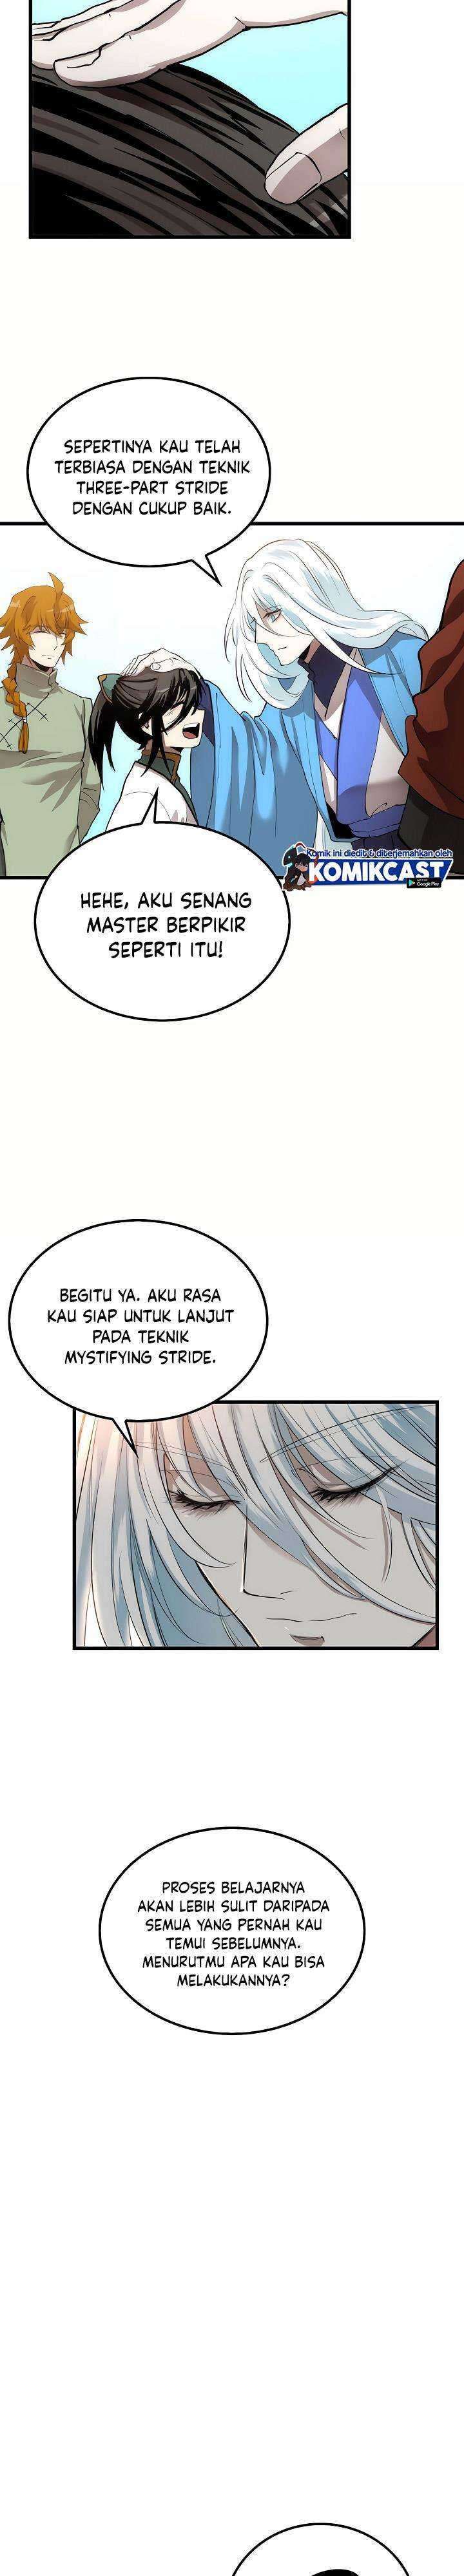 Doctor’s Rebirth Chapter 37